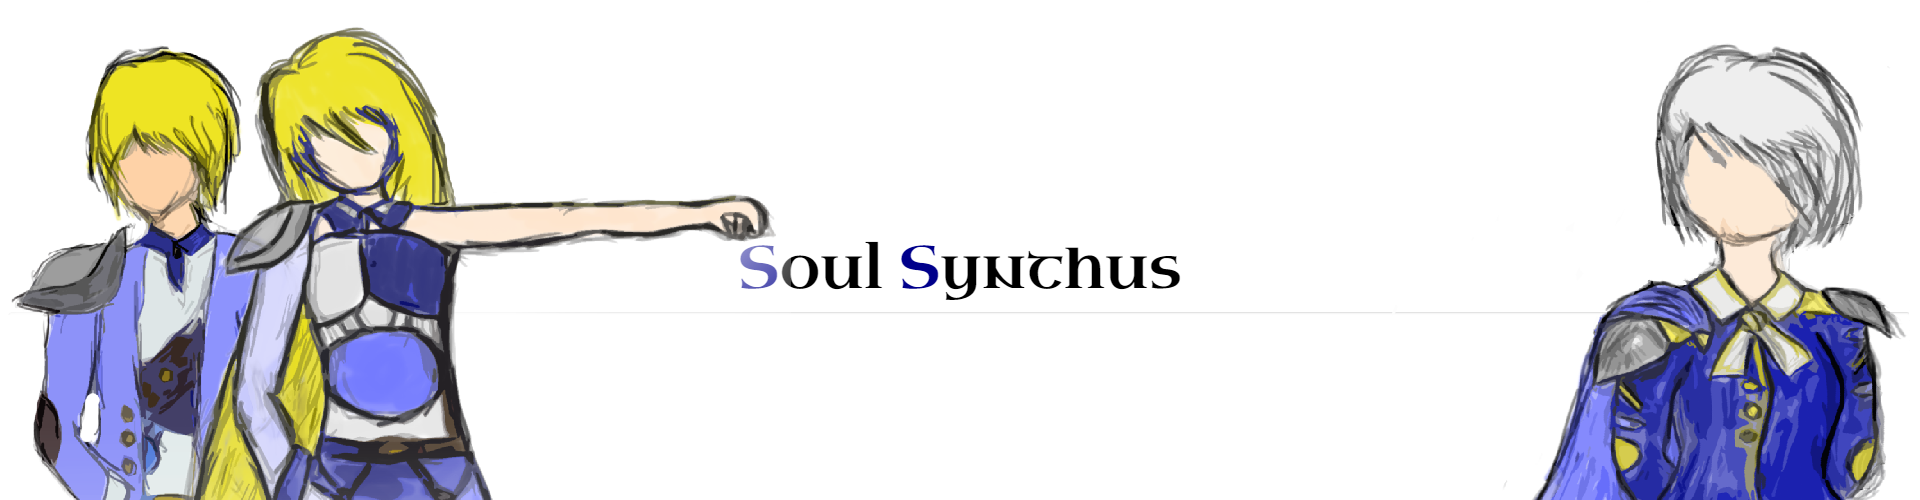 Soul Synthus